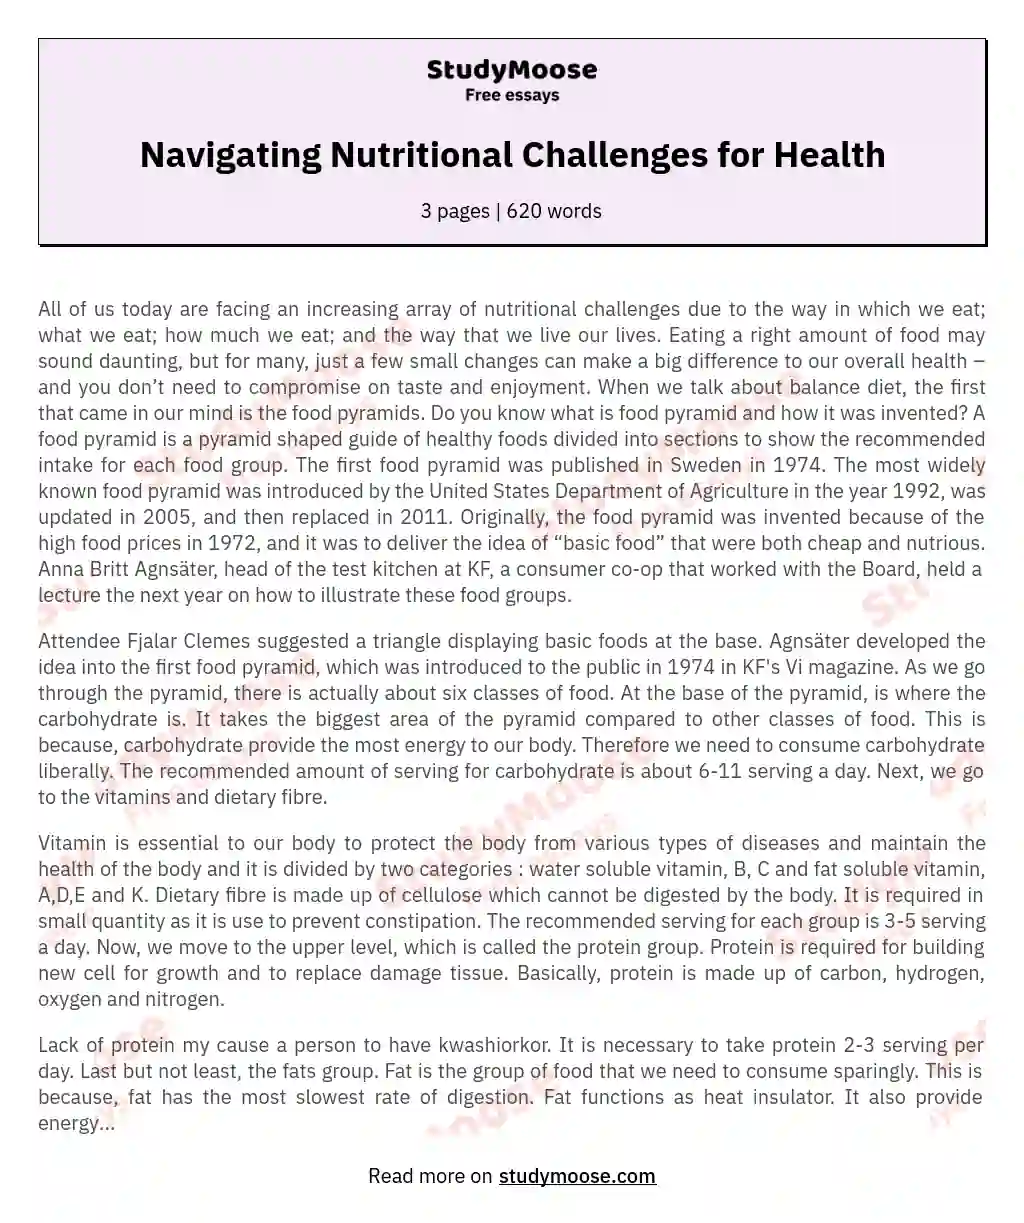 Navigating Nutritional Challenges for Health essay